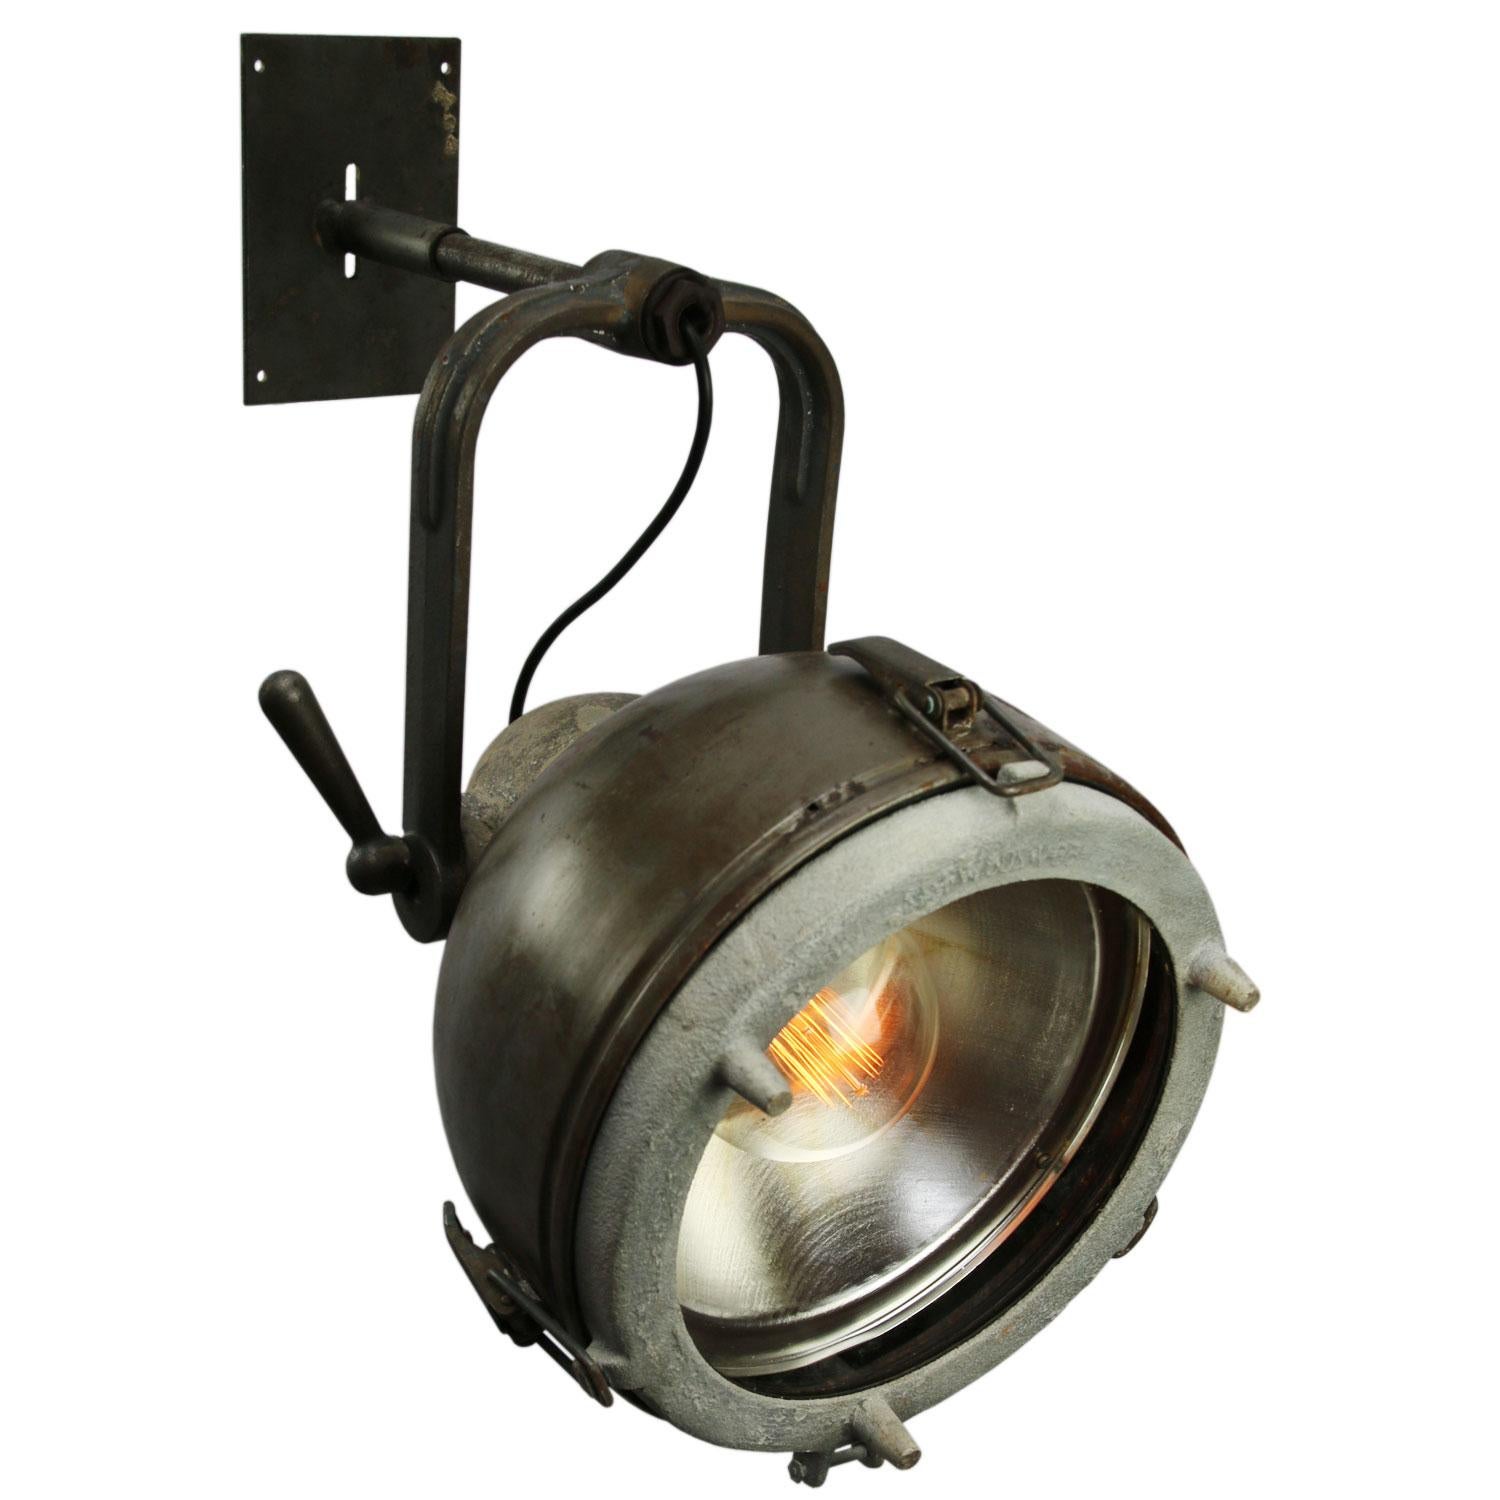 Large industrial wall light. 
Cast aluminium, cast iron, brass shade and clear glass

Weight: 10.20 kg / 22.5 lb

Priced individual item. All lamps have been made suitable by international standards for incandescent light bulbs,